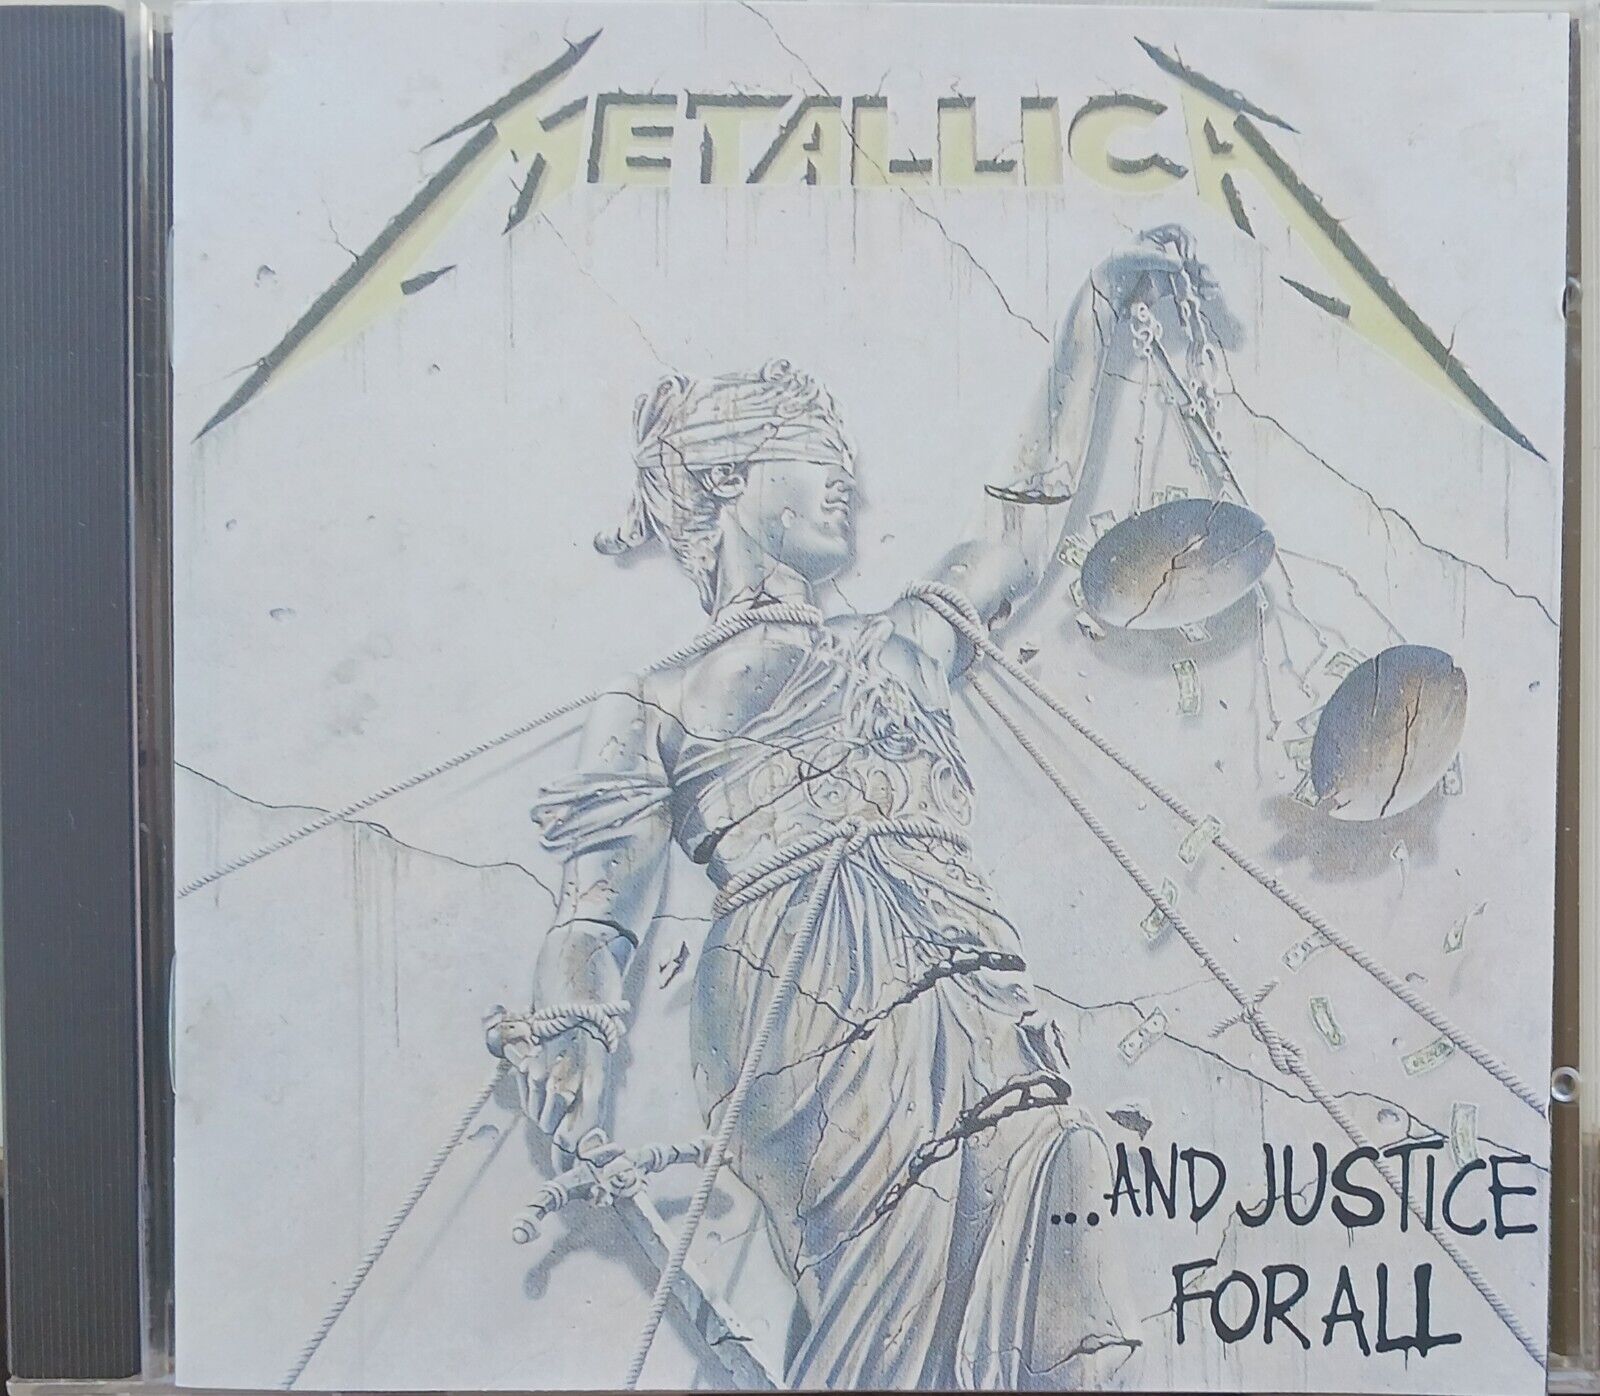 And Justice for All,CD, Metallica (CD, 1990)